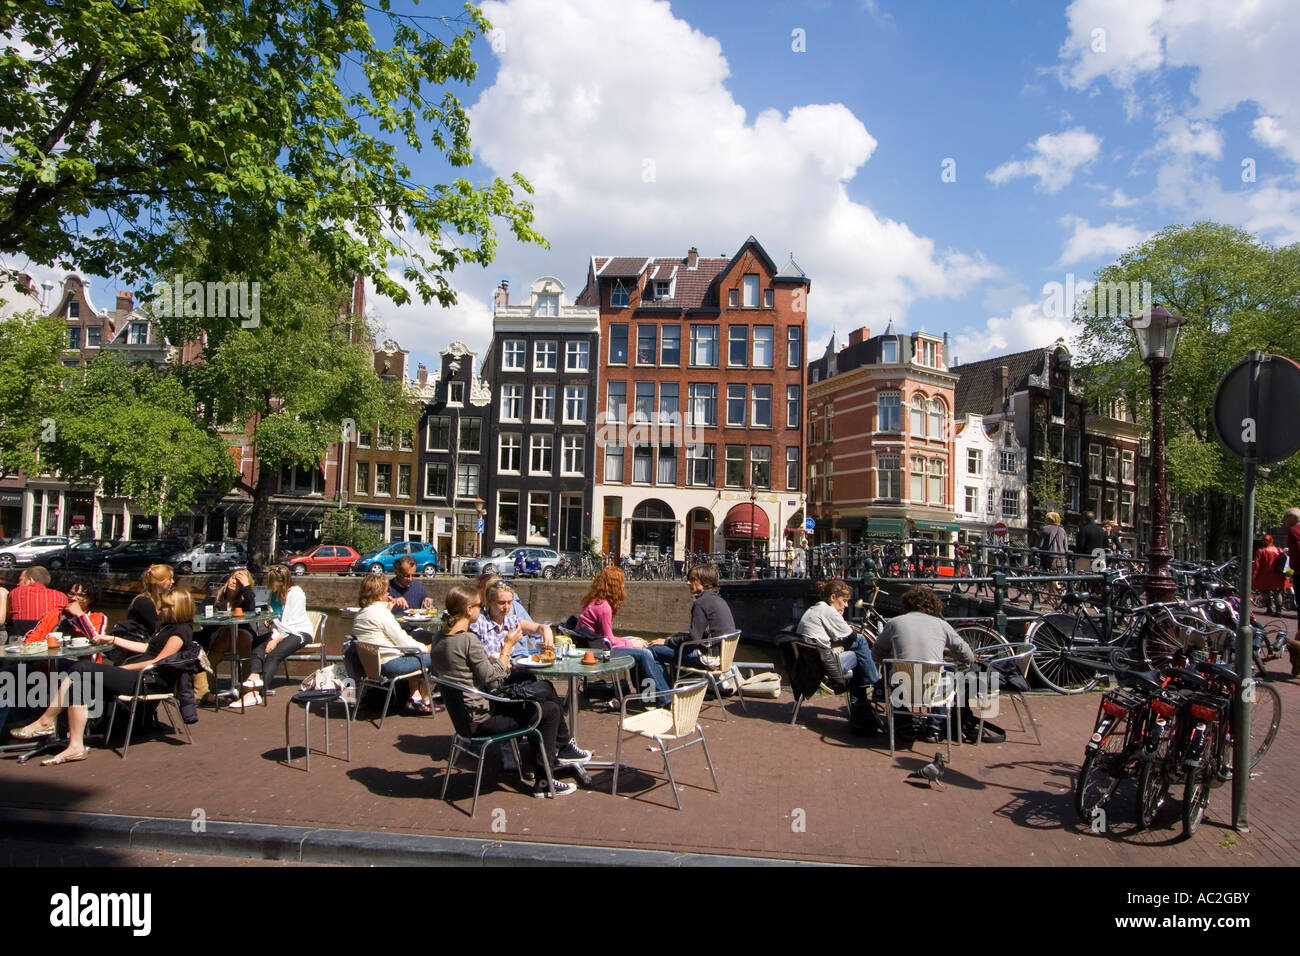 Amsterdam street cafe at a canal typical architecture Stock Photo